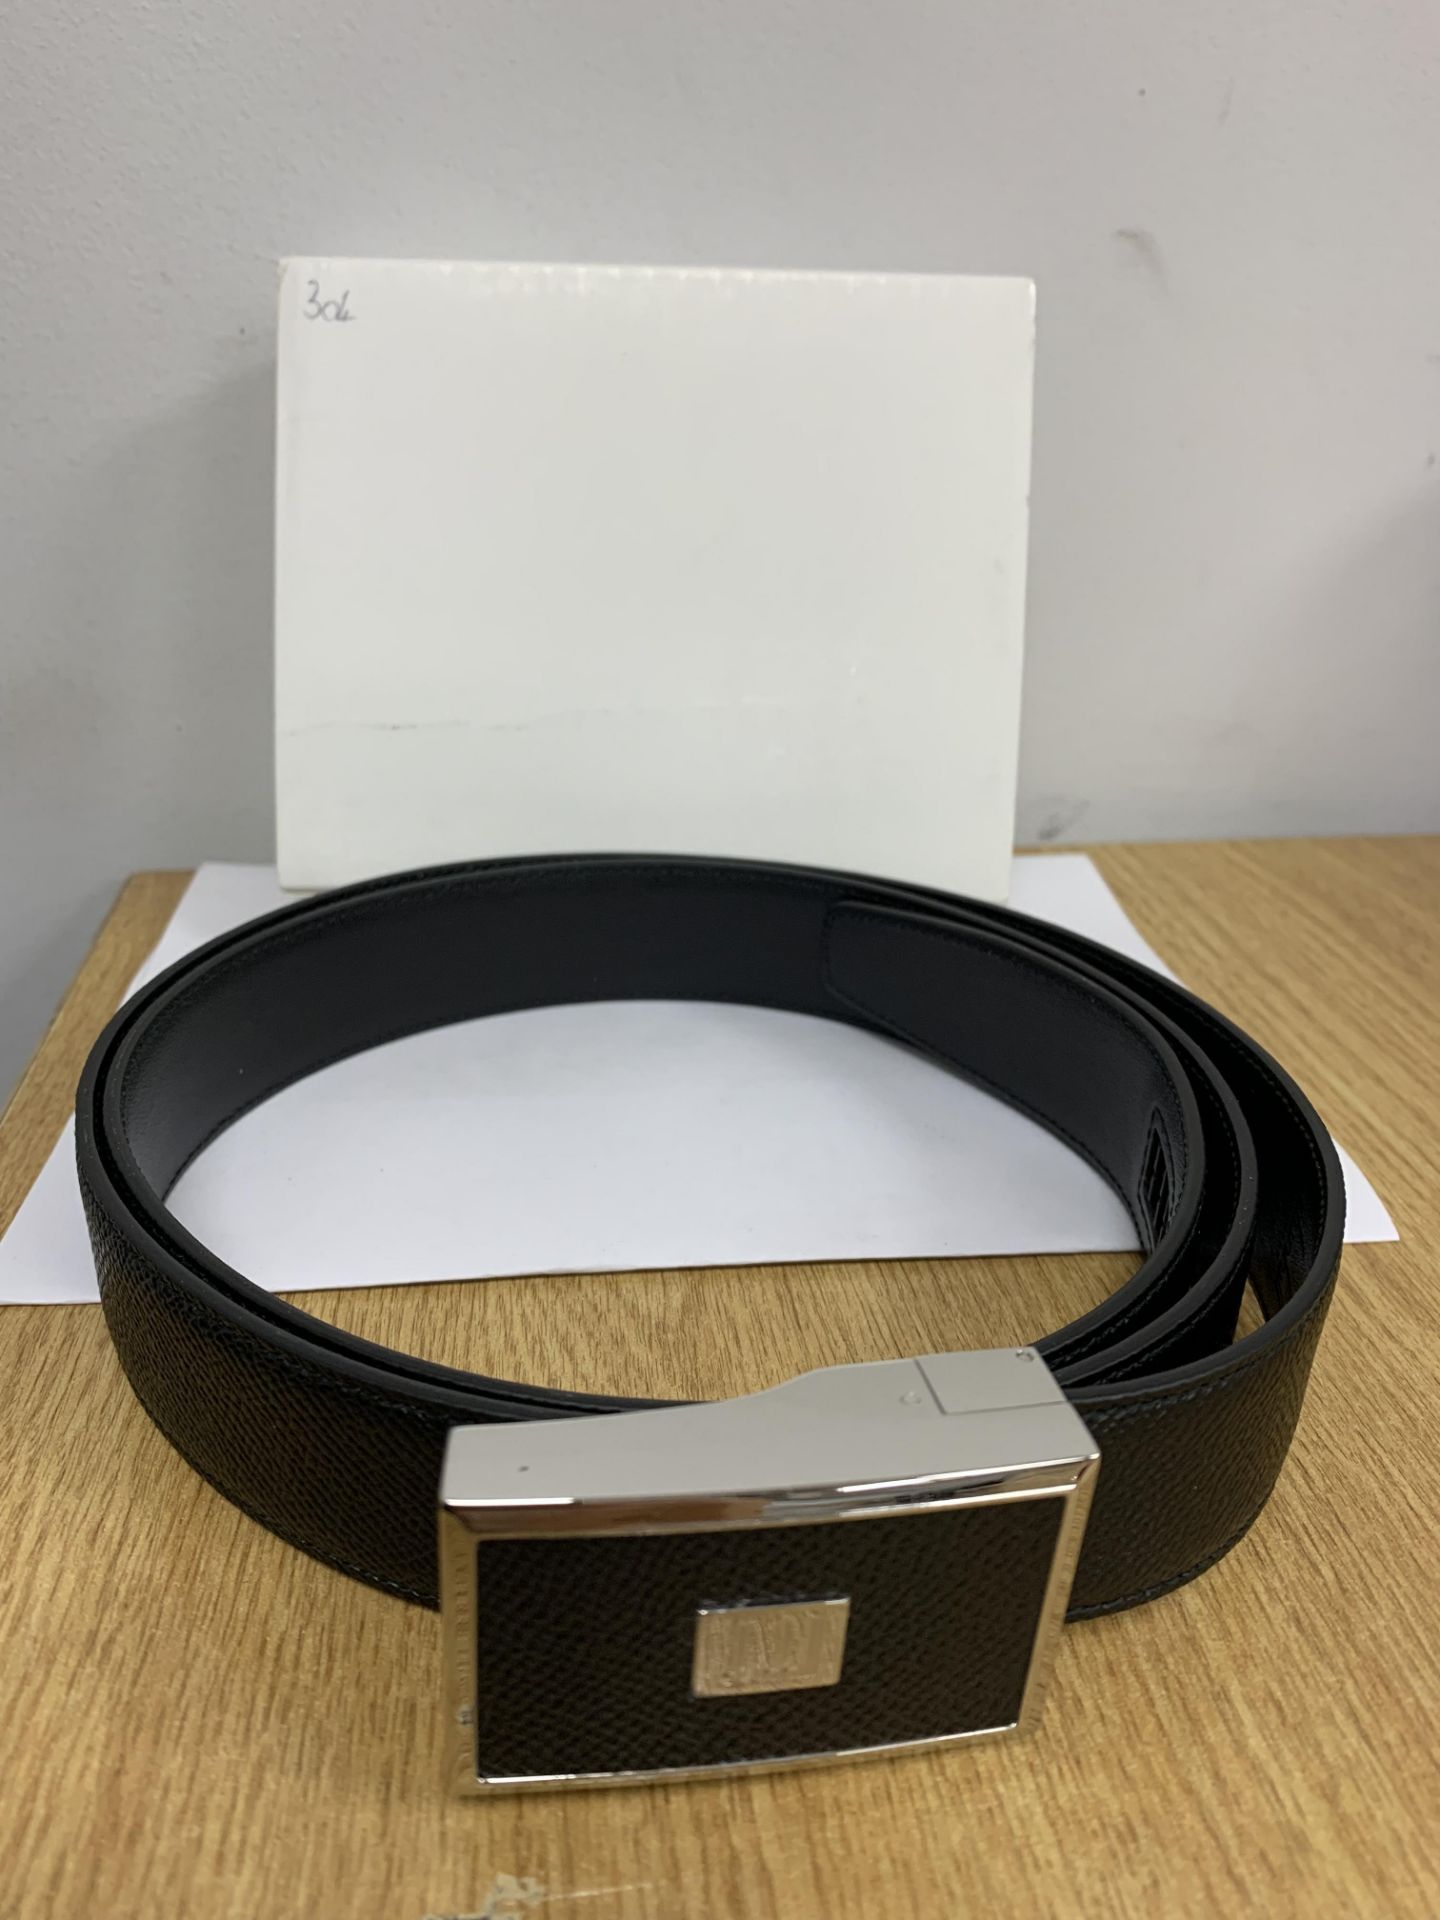 BRAND NEW ALFRED DUNHILL Gt 30Mm BLACK BUCKLE BELT Pdp Cad ONE SIZE (874) RRP £289 - 1